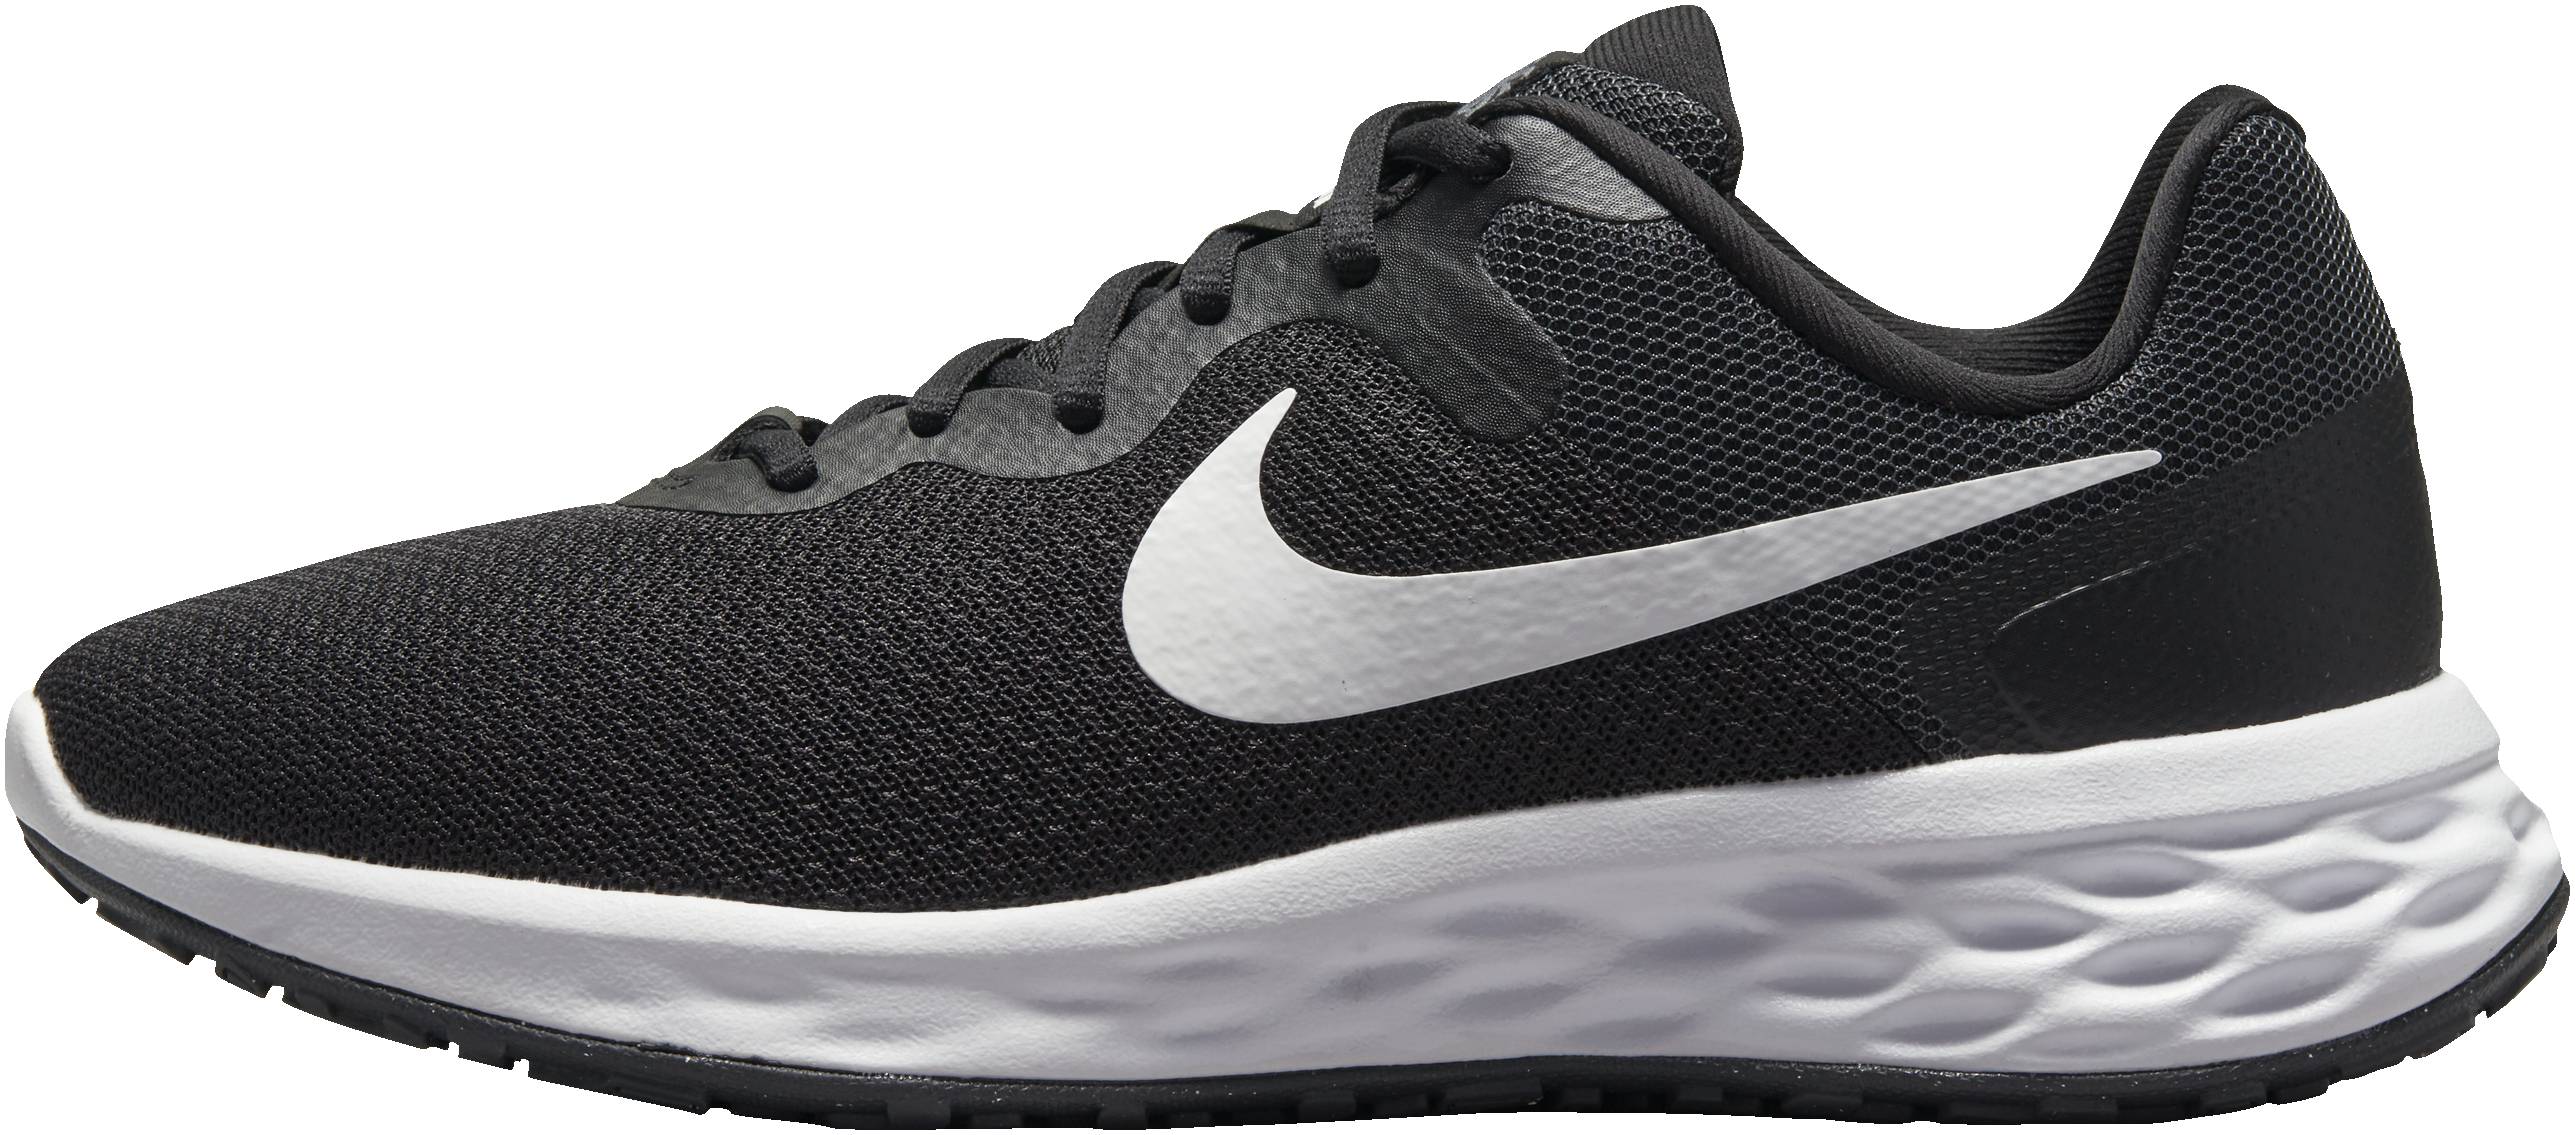 Nike Revolution 6 Review 2022, Facts, Deals RunRepeat